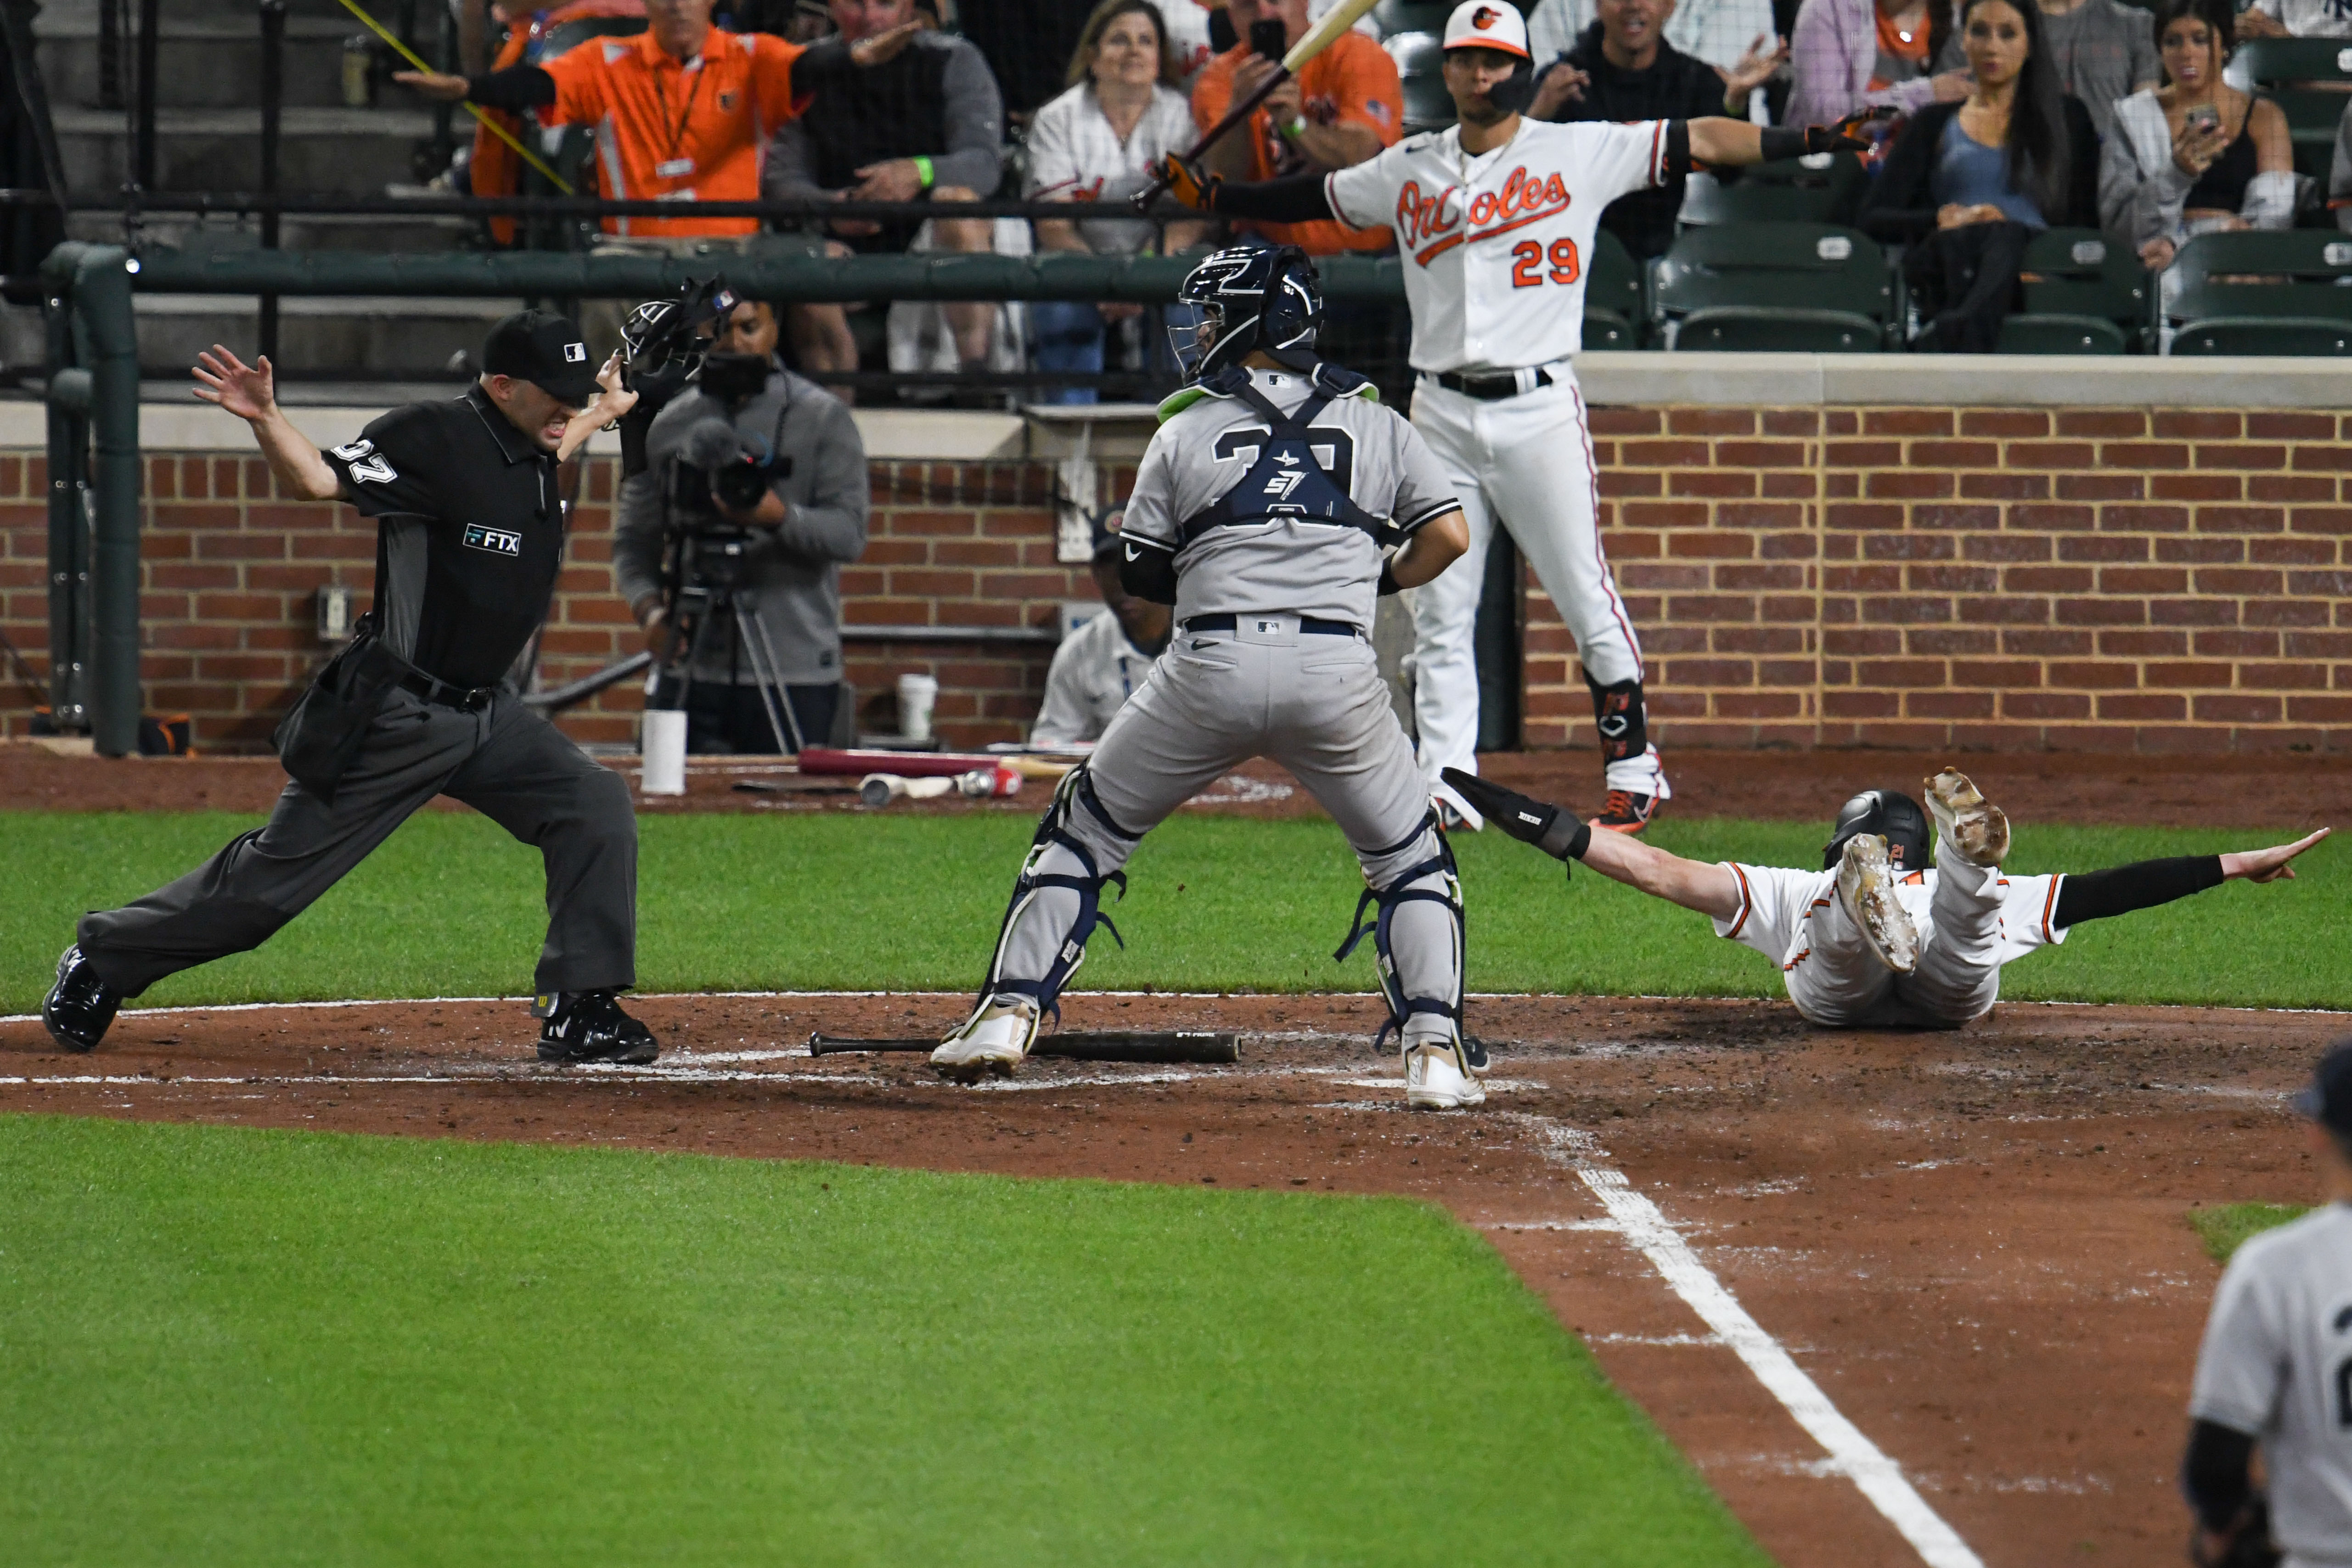 Austin Hays of the Orioles signals himself safe as he slides along the ground after scoring a run against the Yankees.